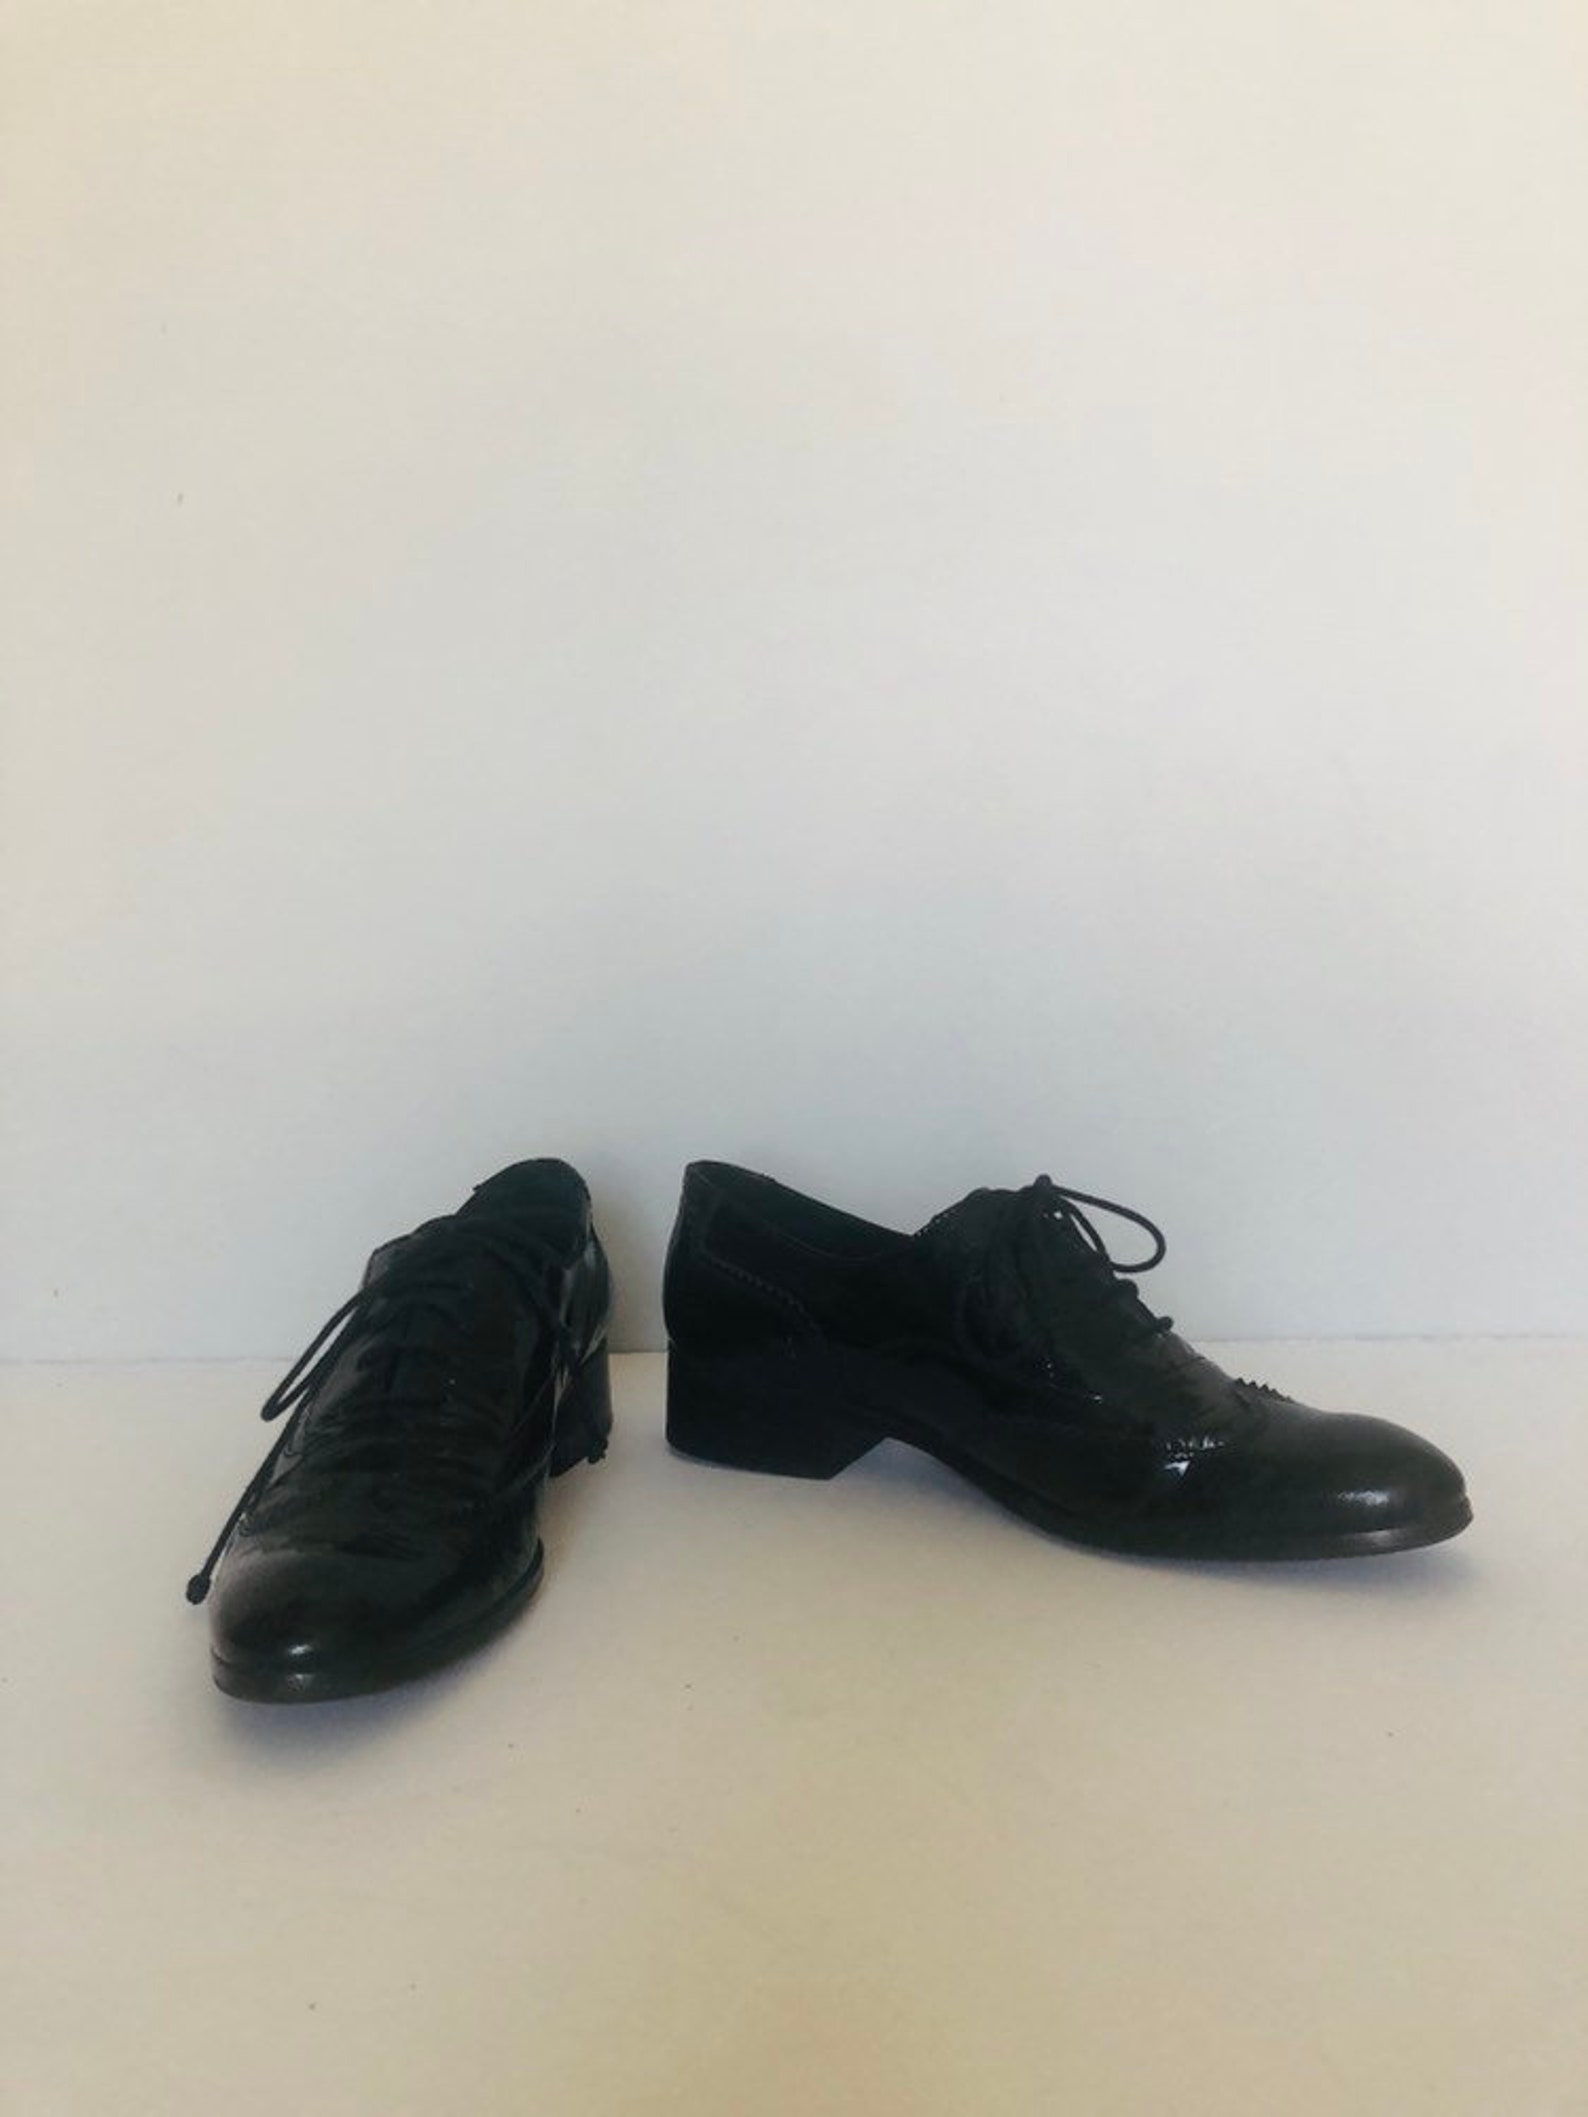 Vintage 80s Patent Leather Oxford Heels Size 7-7.5 US - Etsy